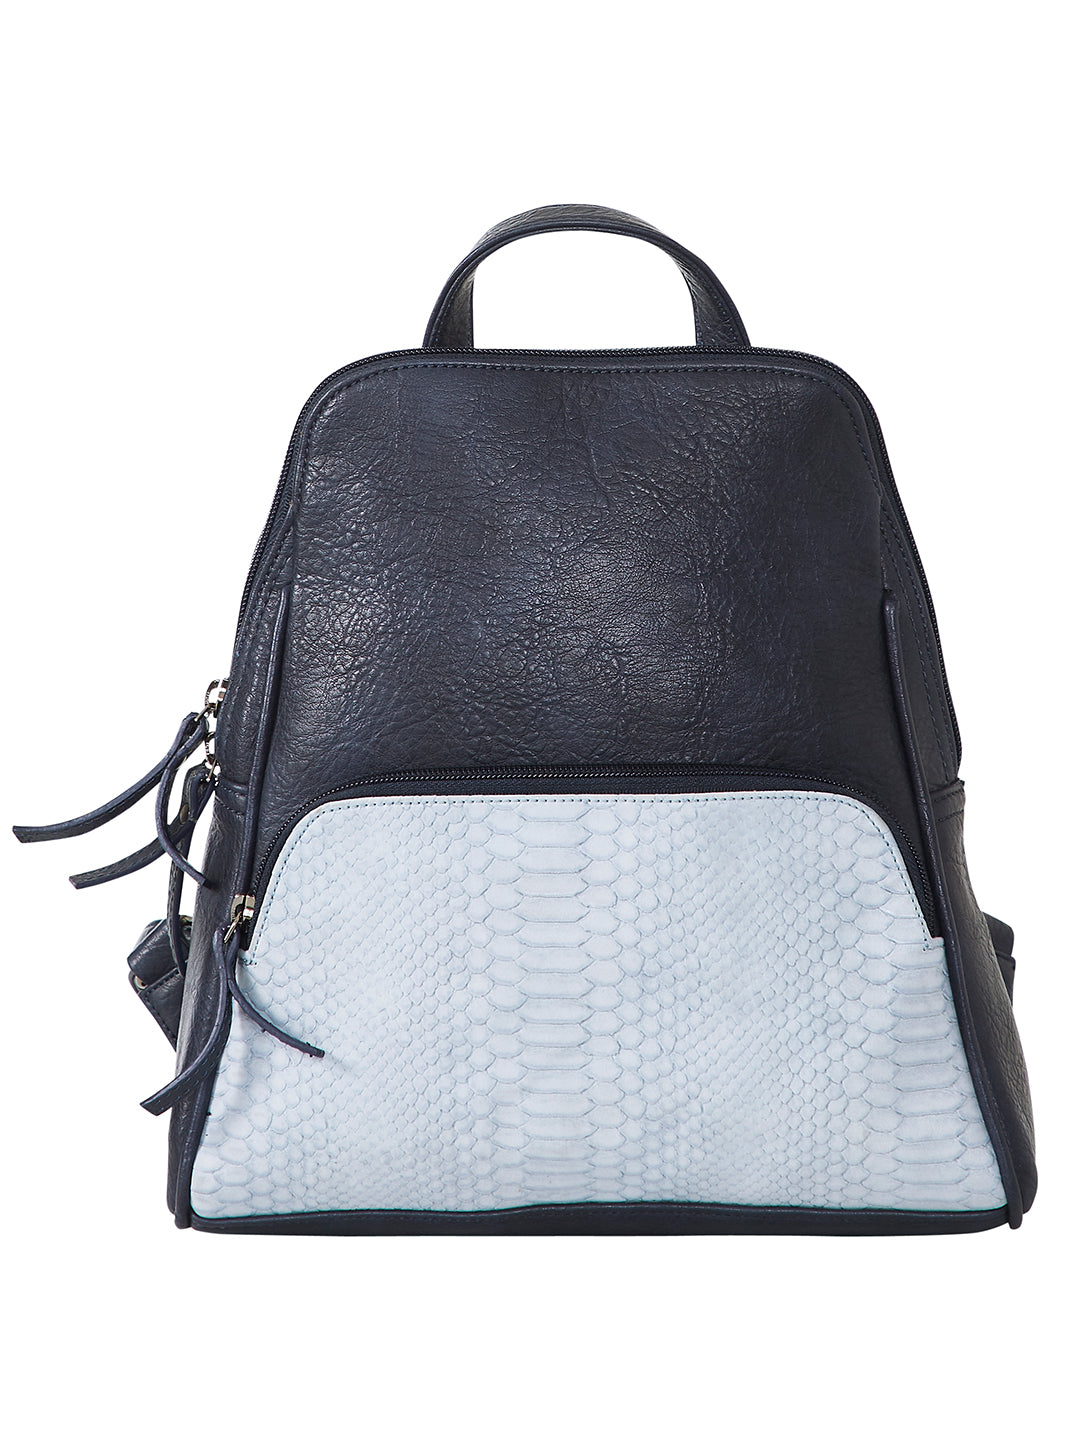 Mona B Convertible Daypack for Offices Schools and Colleges with Stylish Design for Women: Denim